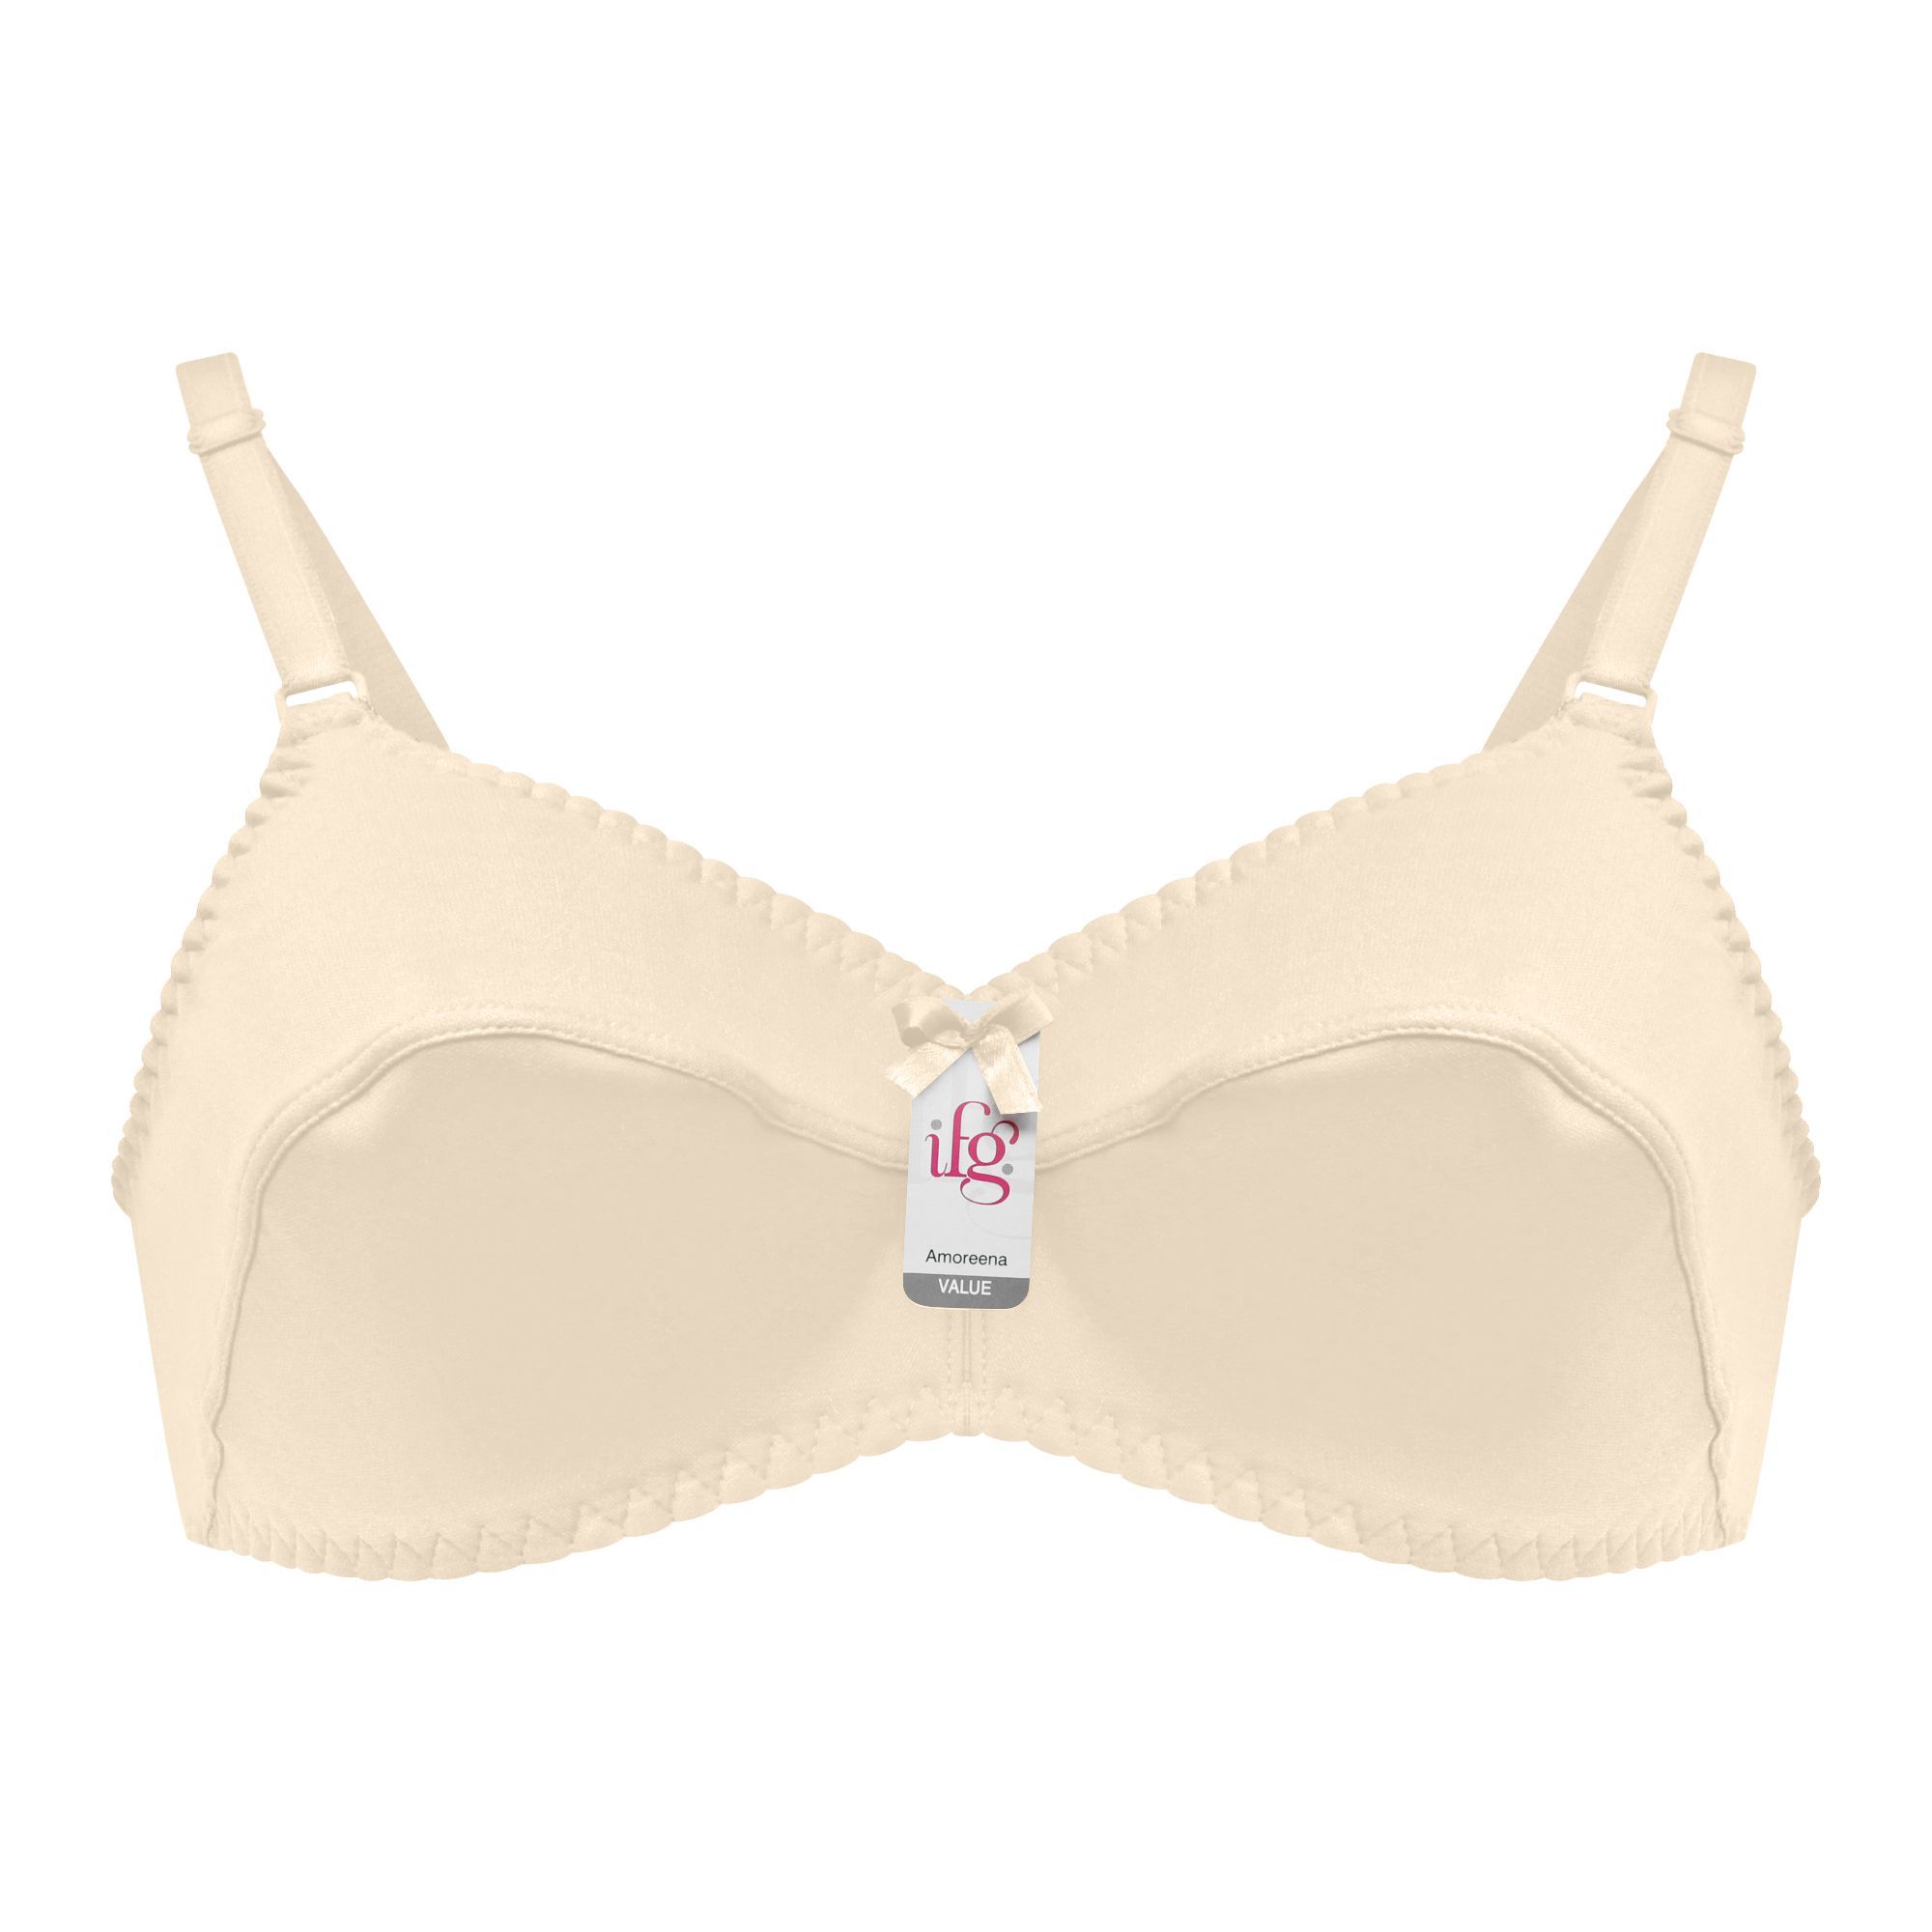 Purchase IFG Amoreena Bra, Skin Online at Special Price in Pakistan 